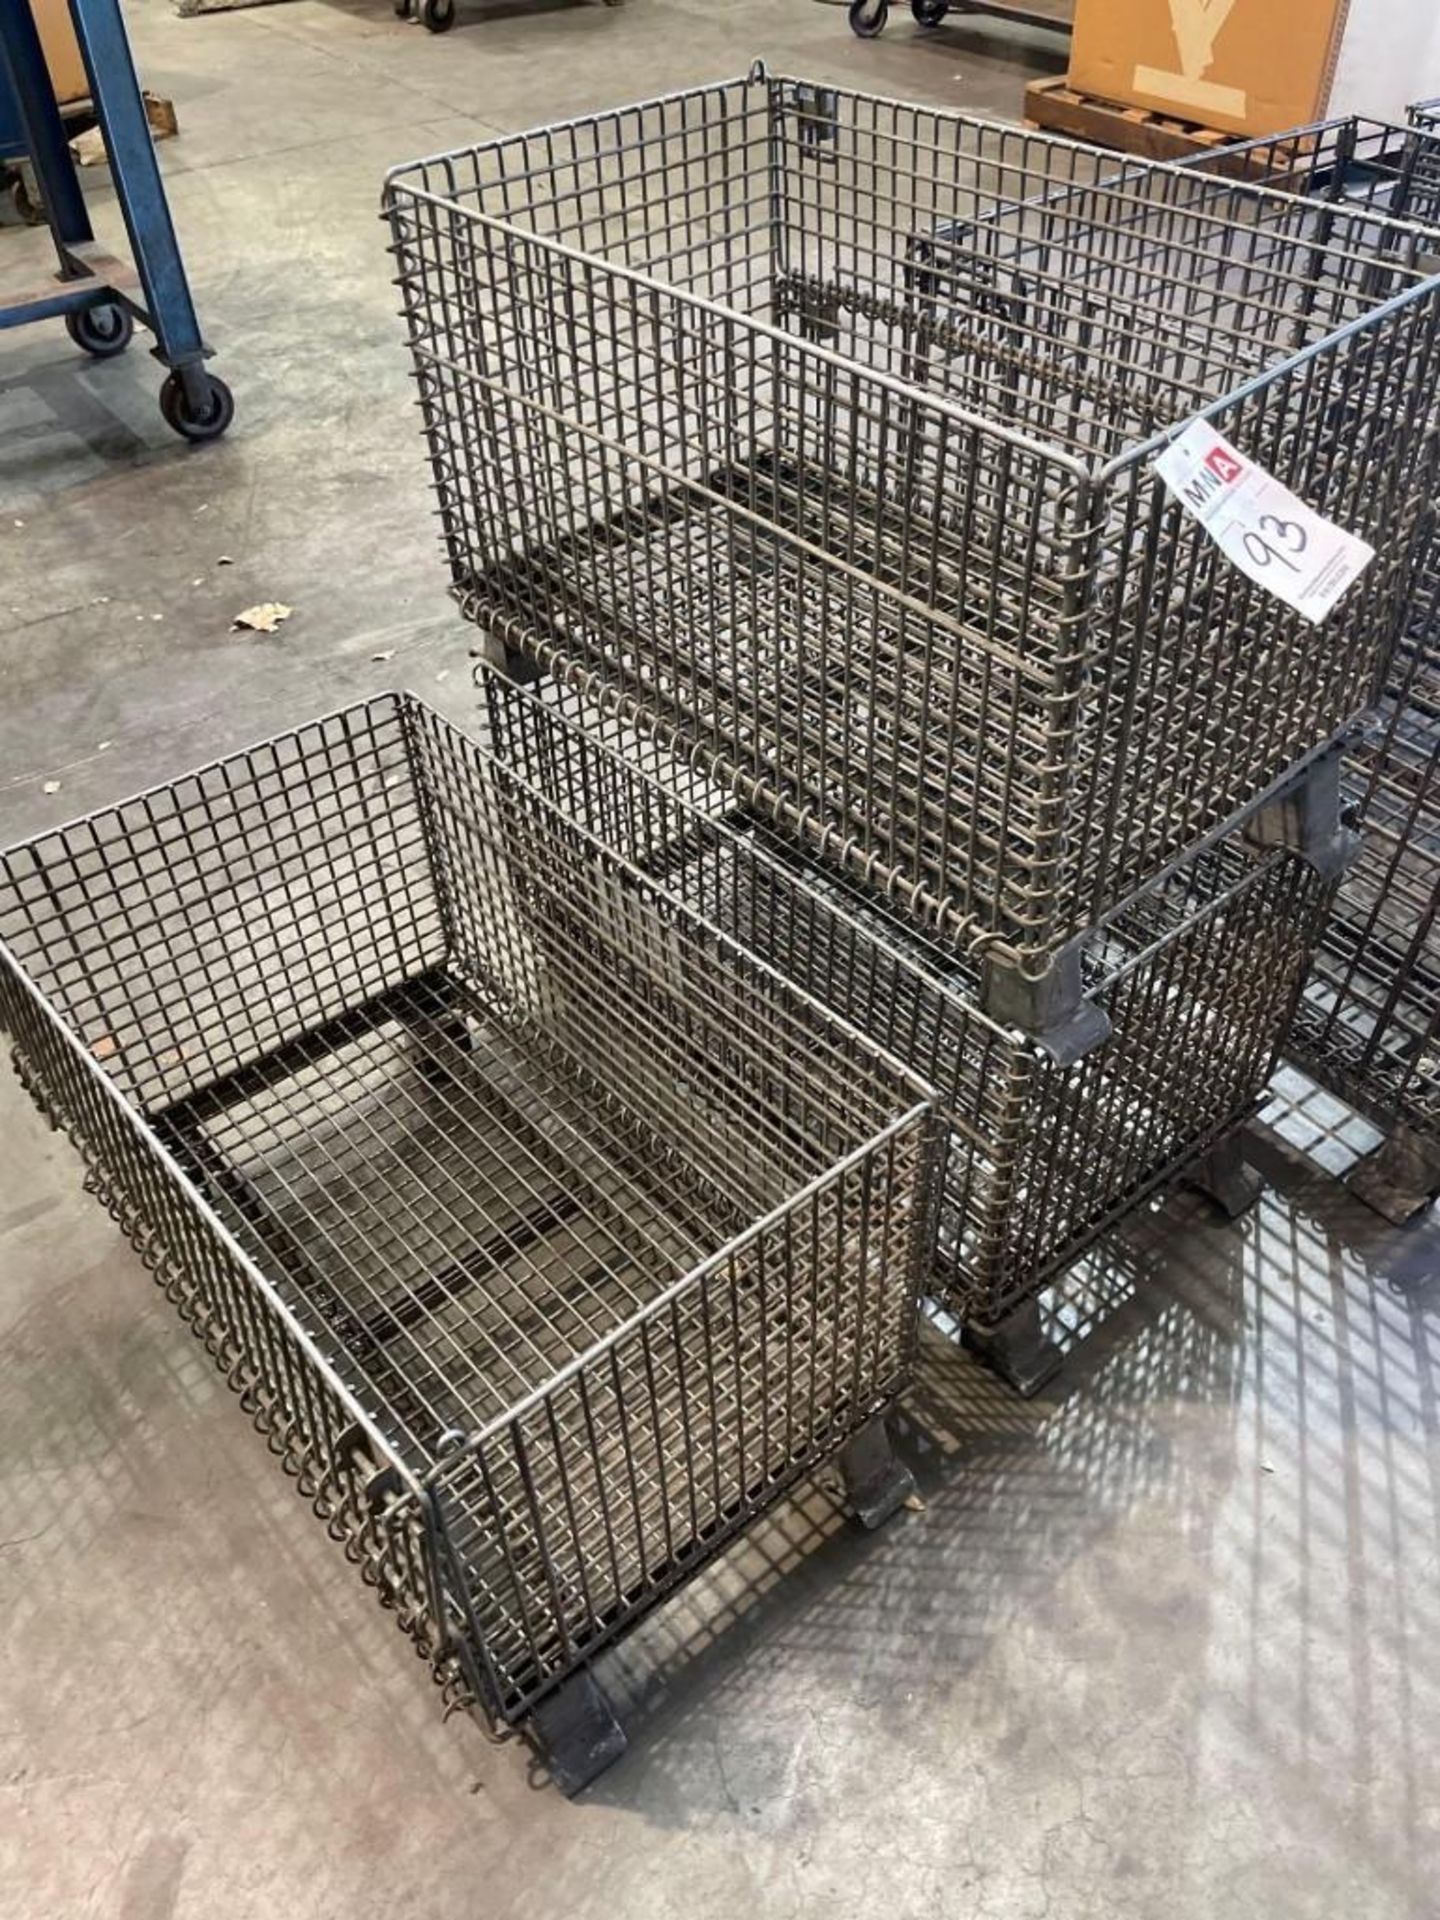 (10) 20" x 32" x 16" Wire Transport Baskets - Image 2 of 3